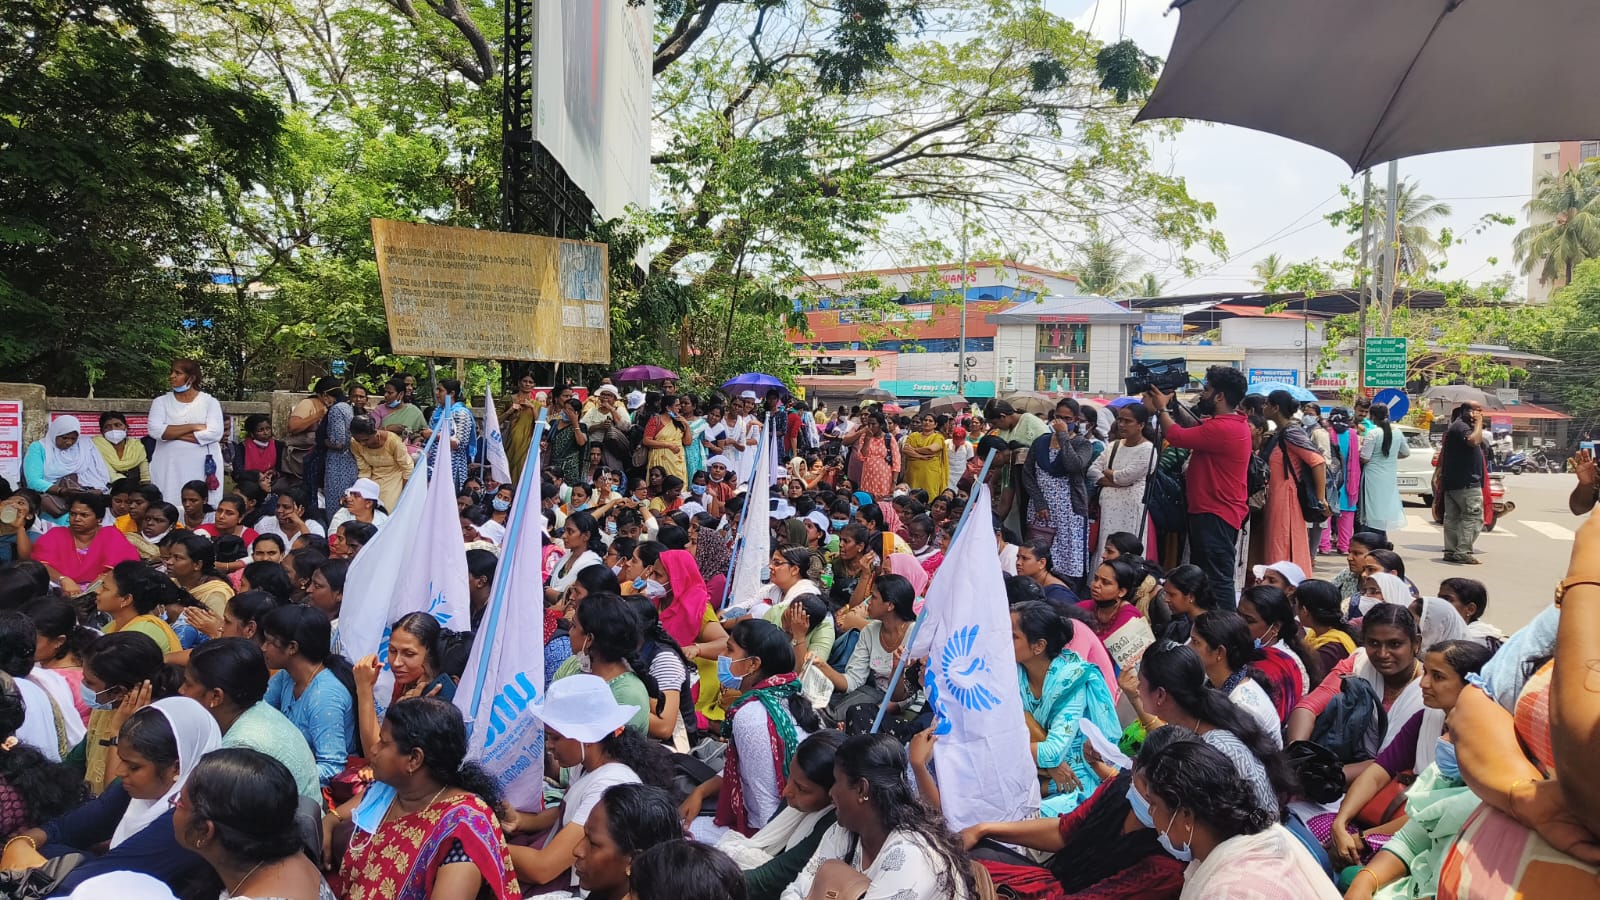 United Nurses Association (UNA) members hold a strike in Thrissur city, seeking better wages and working conditions. (Supplied)